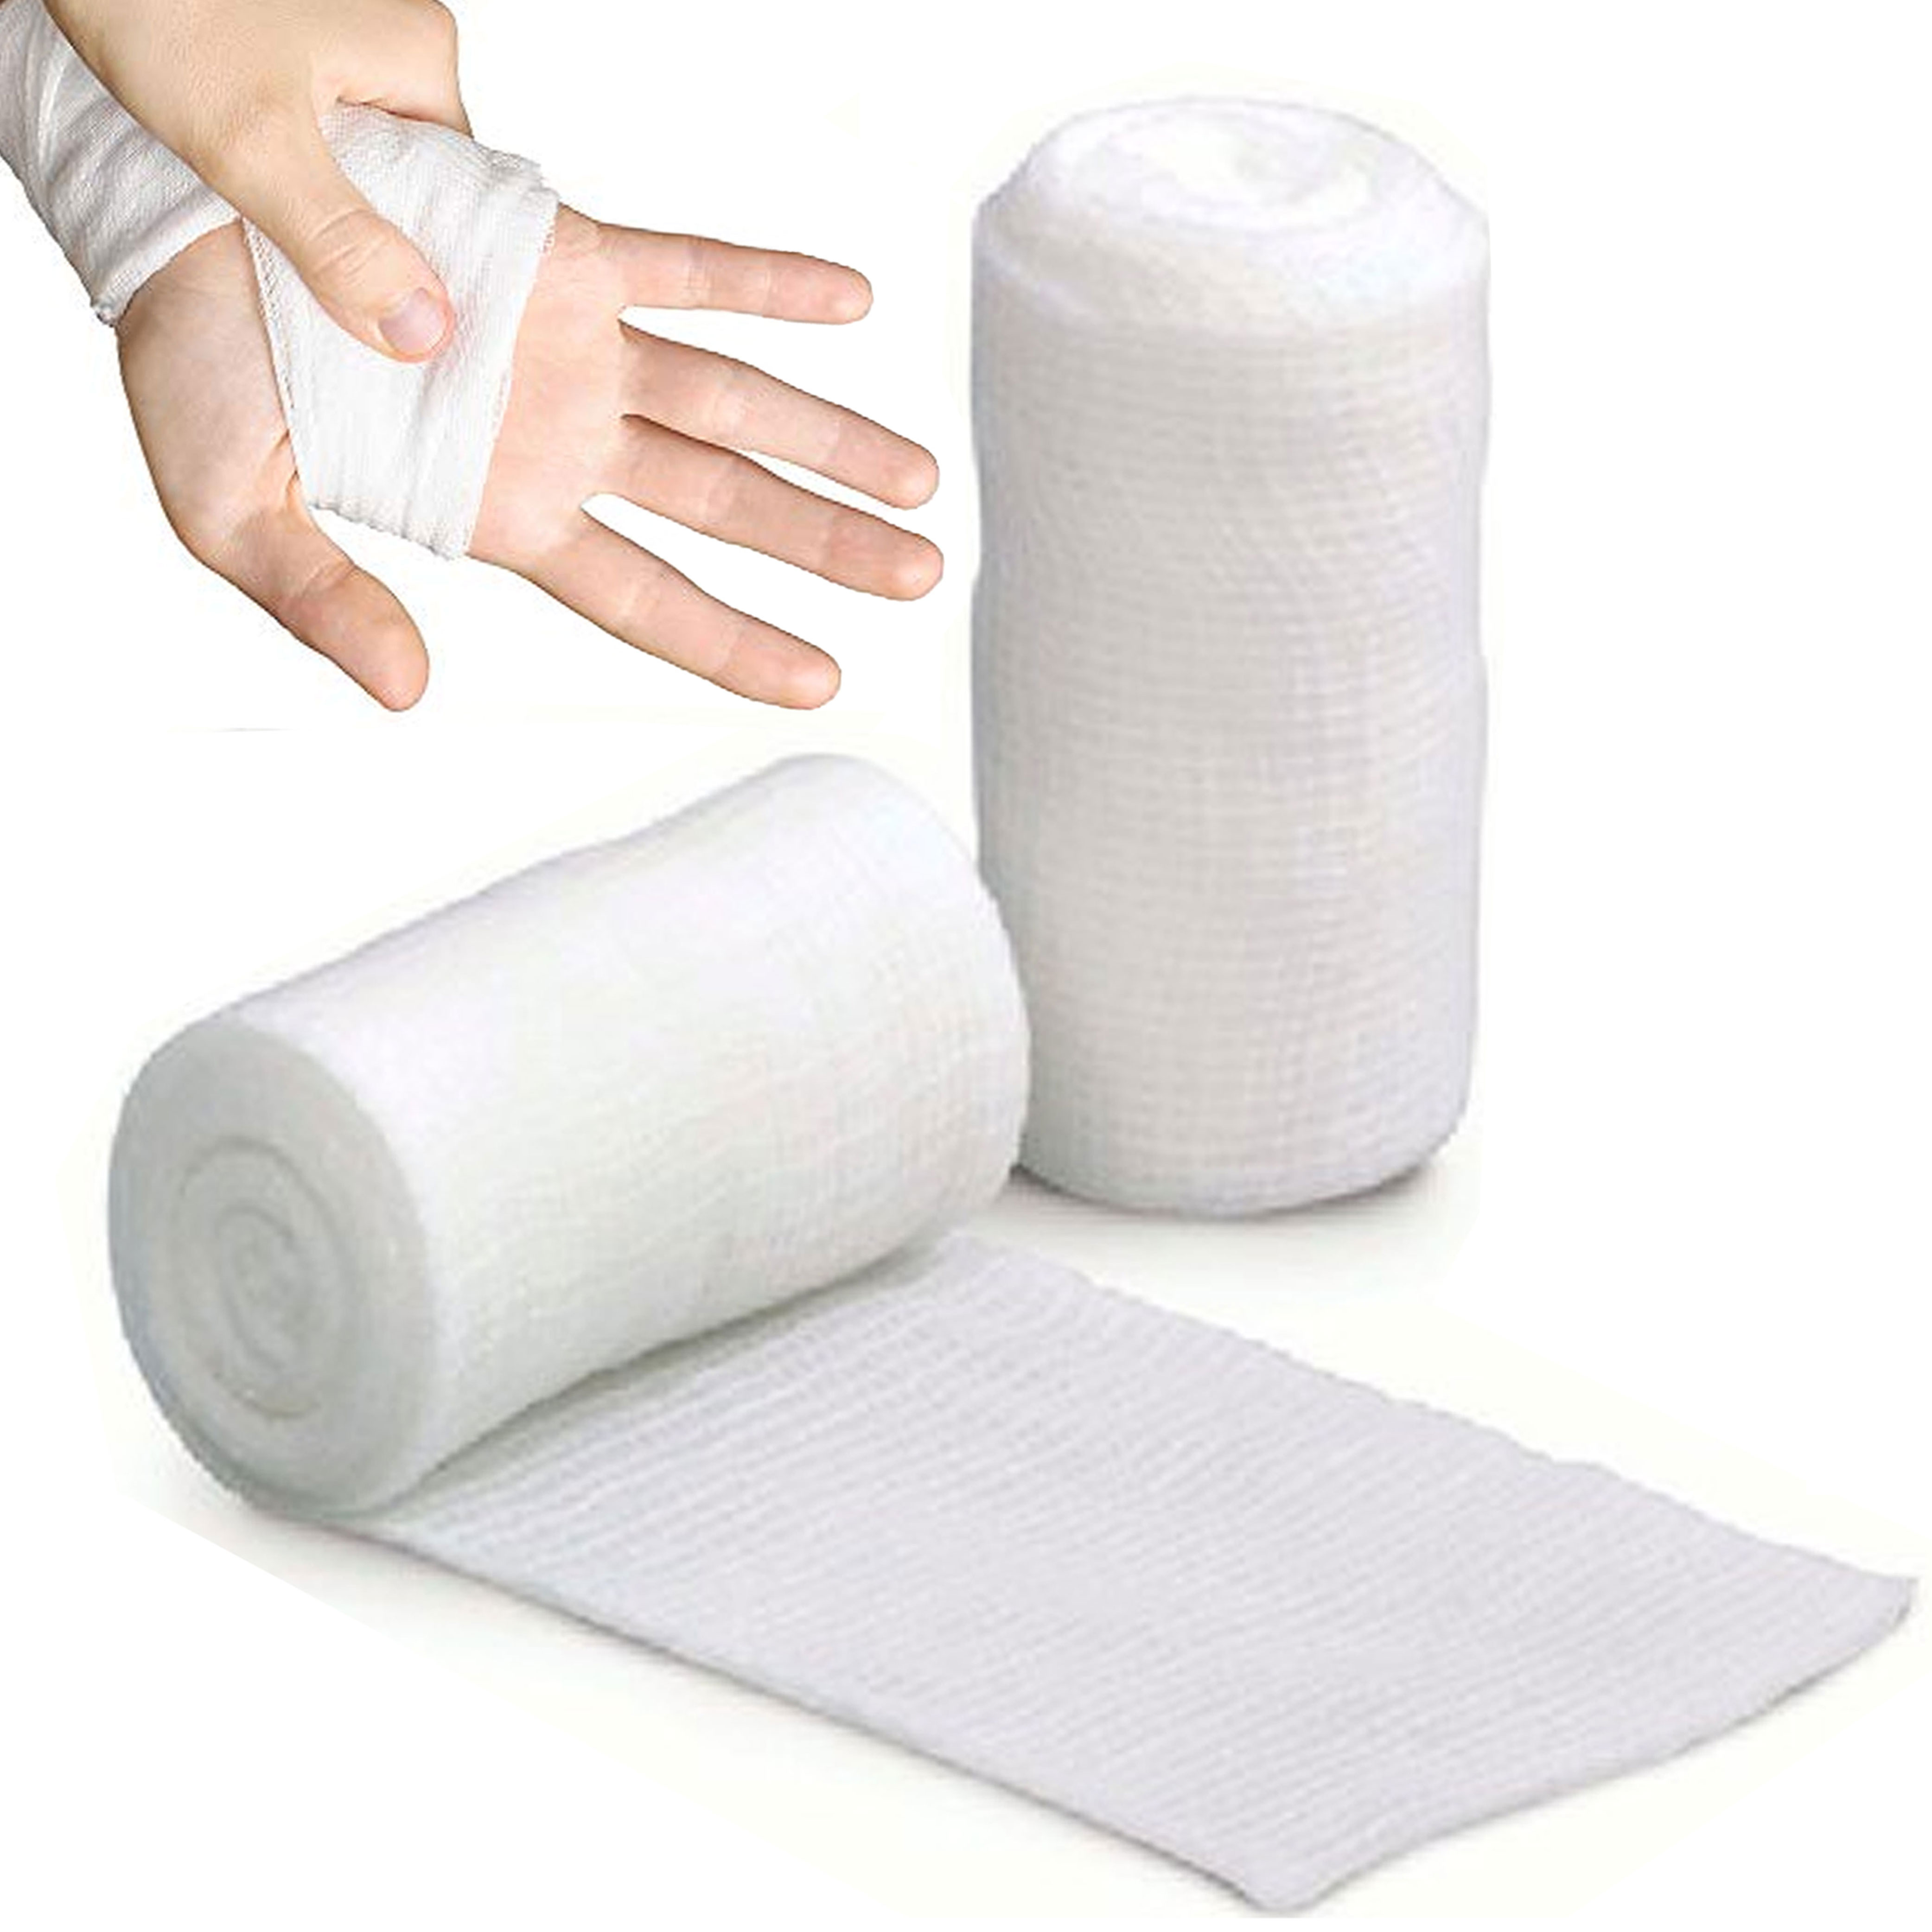  OHPHCALL Compressed Gauze Medical Tape for Gauze Pads pro Gaff  Tape Compression Bandage Gauze Tape Medical Adhesive Tape Gauze Bandage  Medical Bandages Breathable Cotton White Accessories : Health & Household